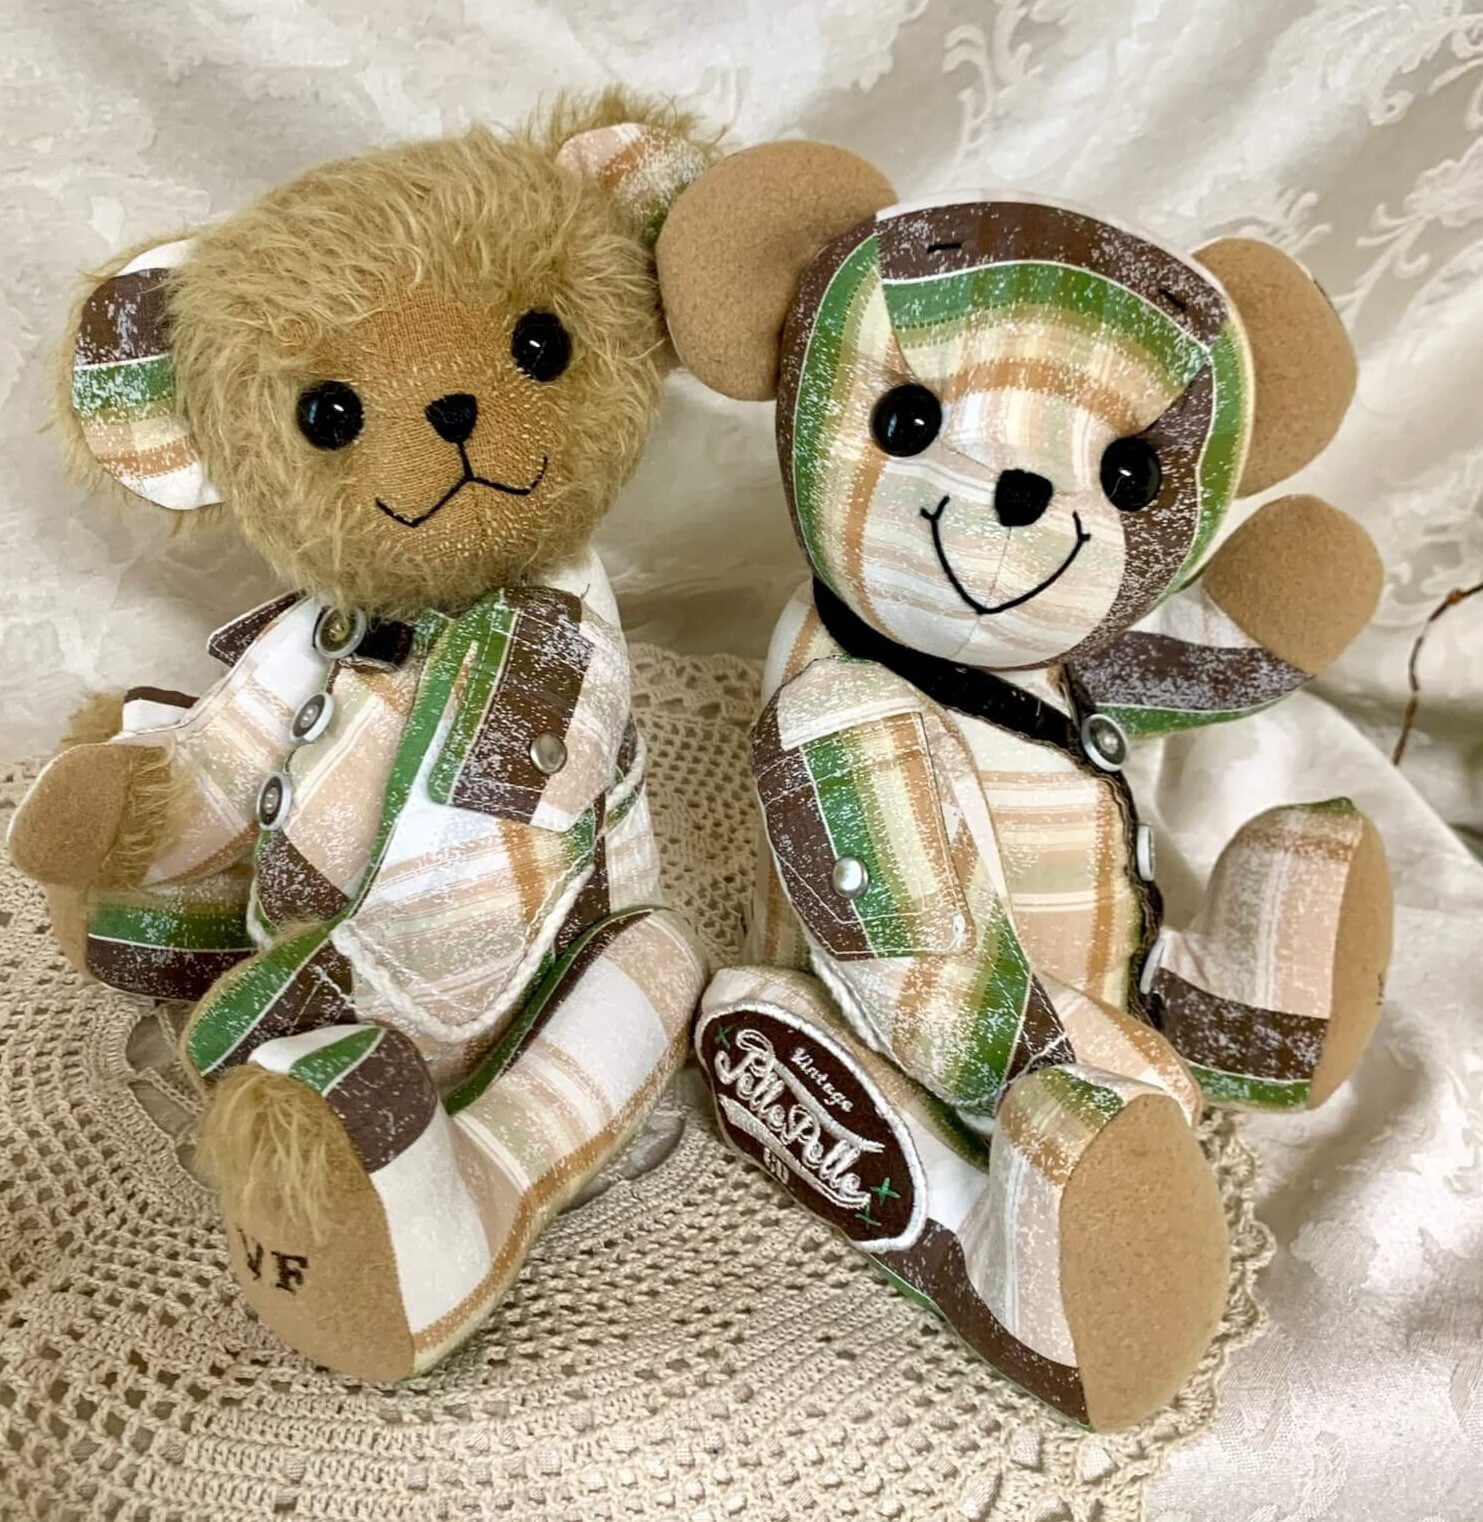 Two memorial teddy bears made from plaid shirt.